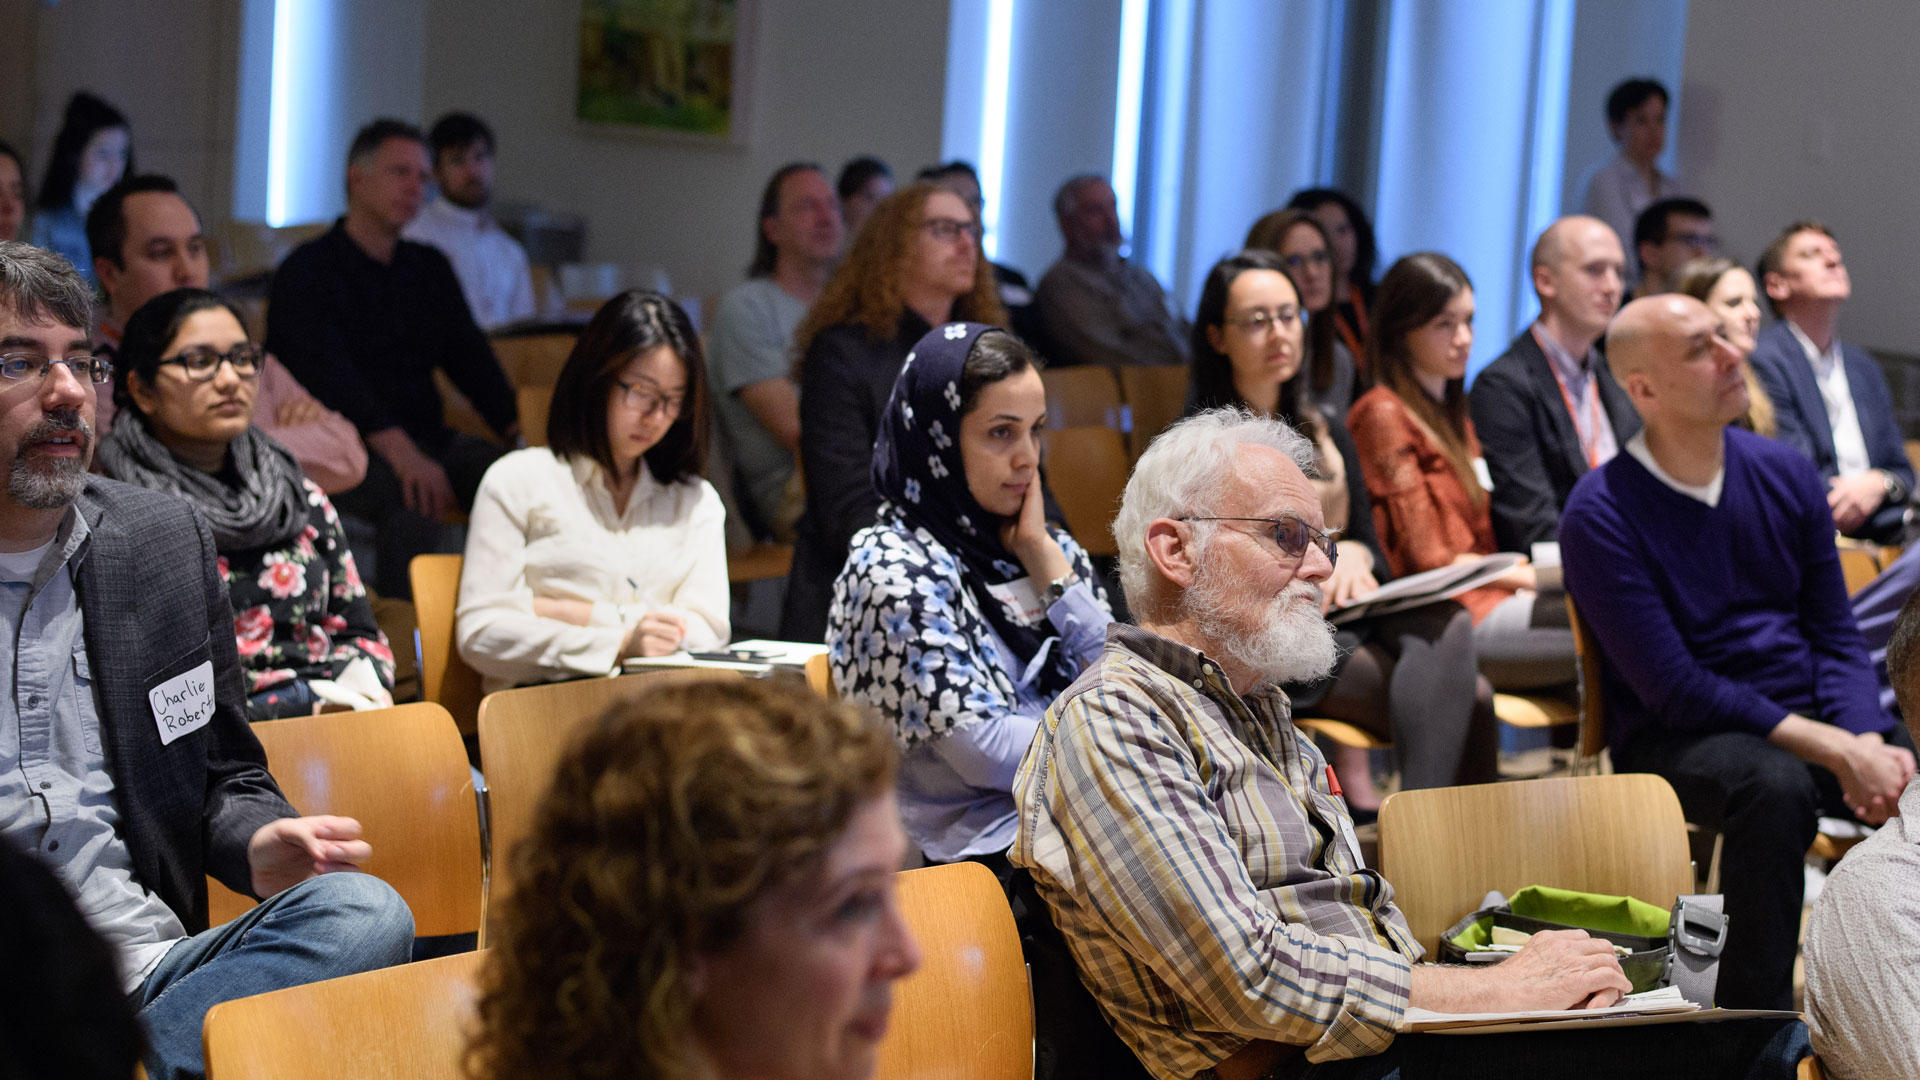 Audience members at the 2018 symposium of engineering and the arts